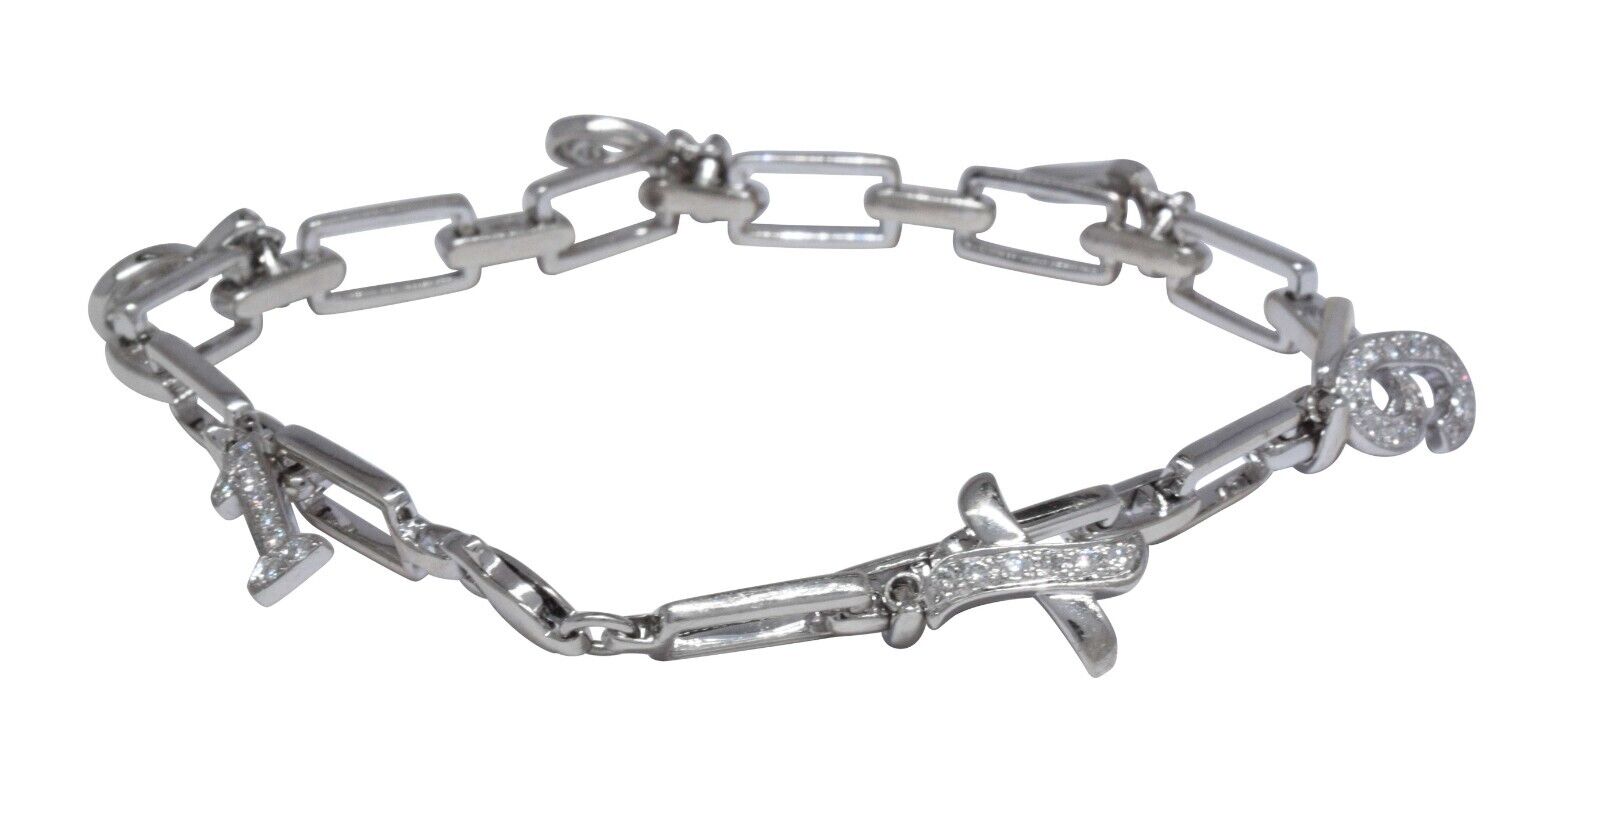 18k White Gold & Diamond Bracelet with Dangling Numbers